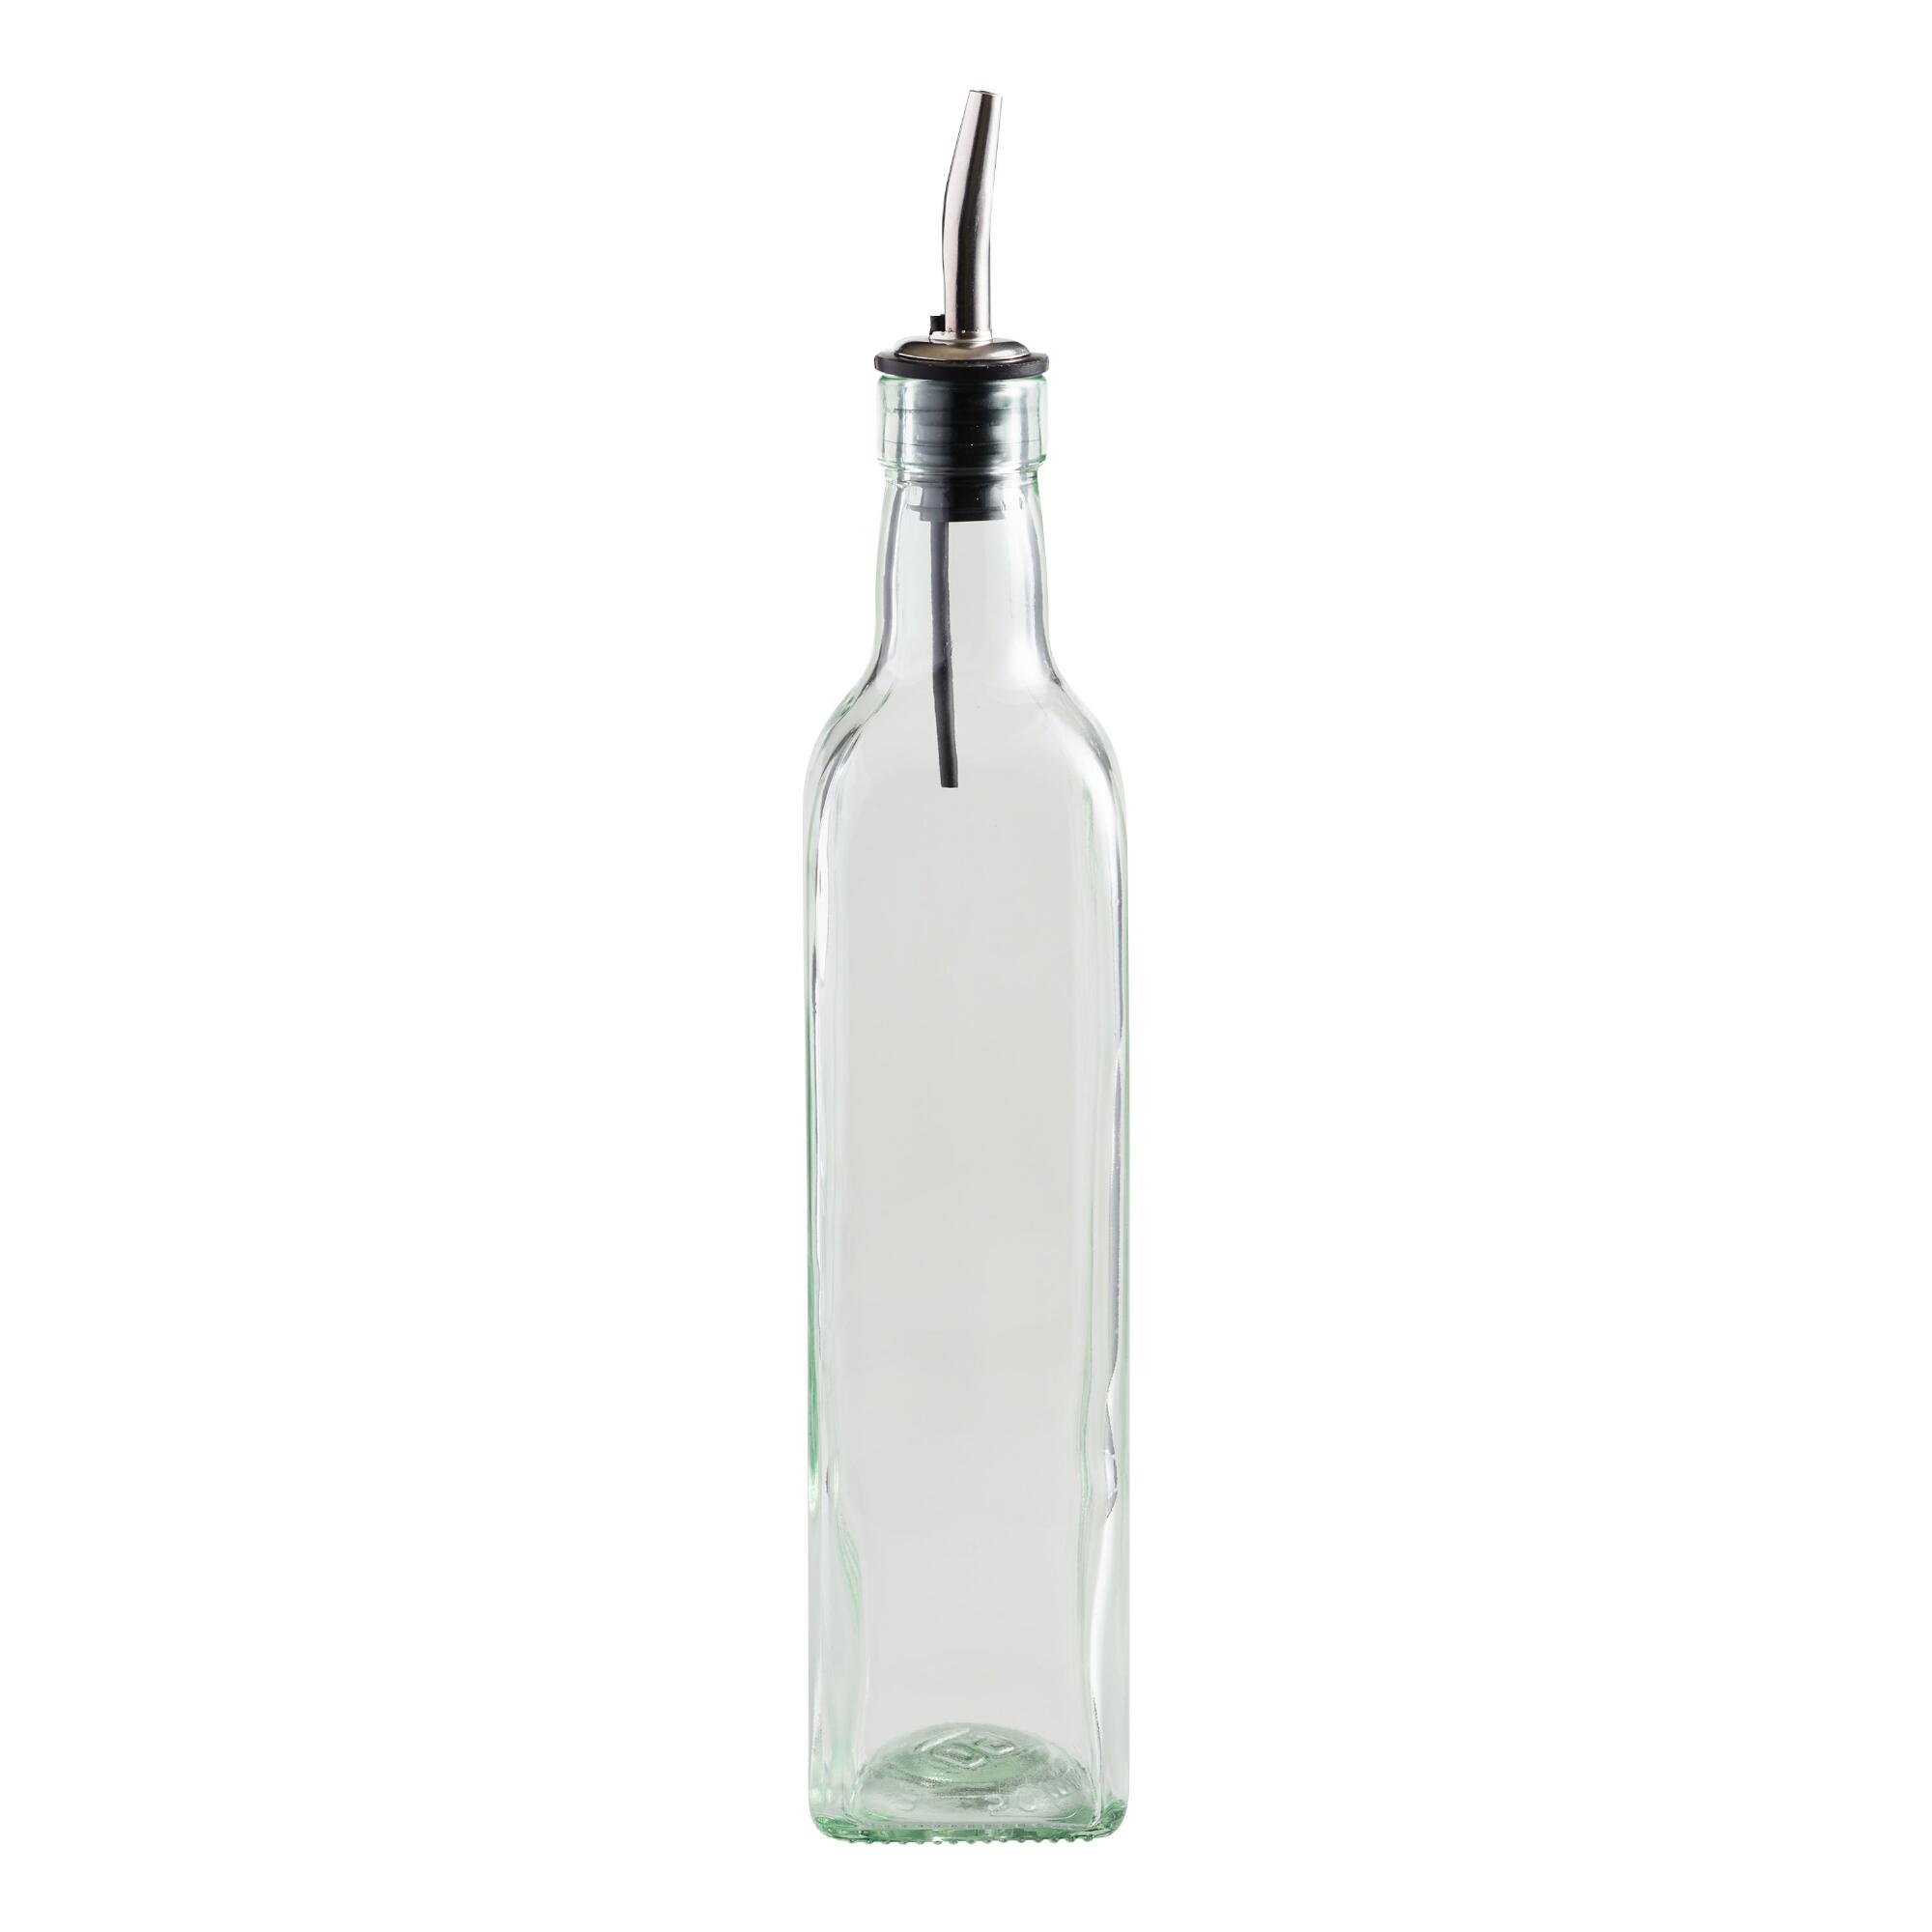 Square Green Glass Oil Bottle With Spout by World Market